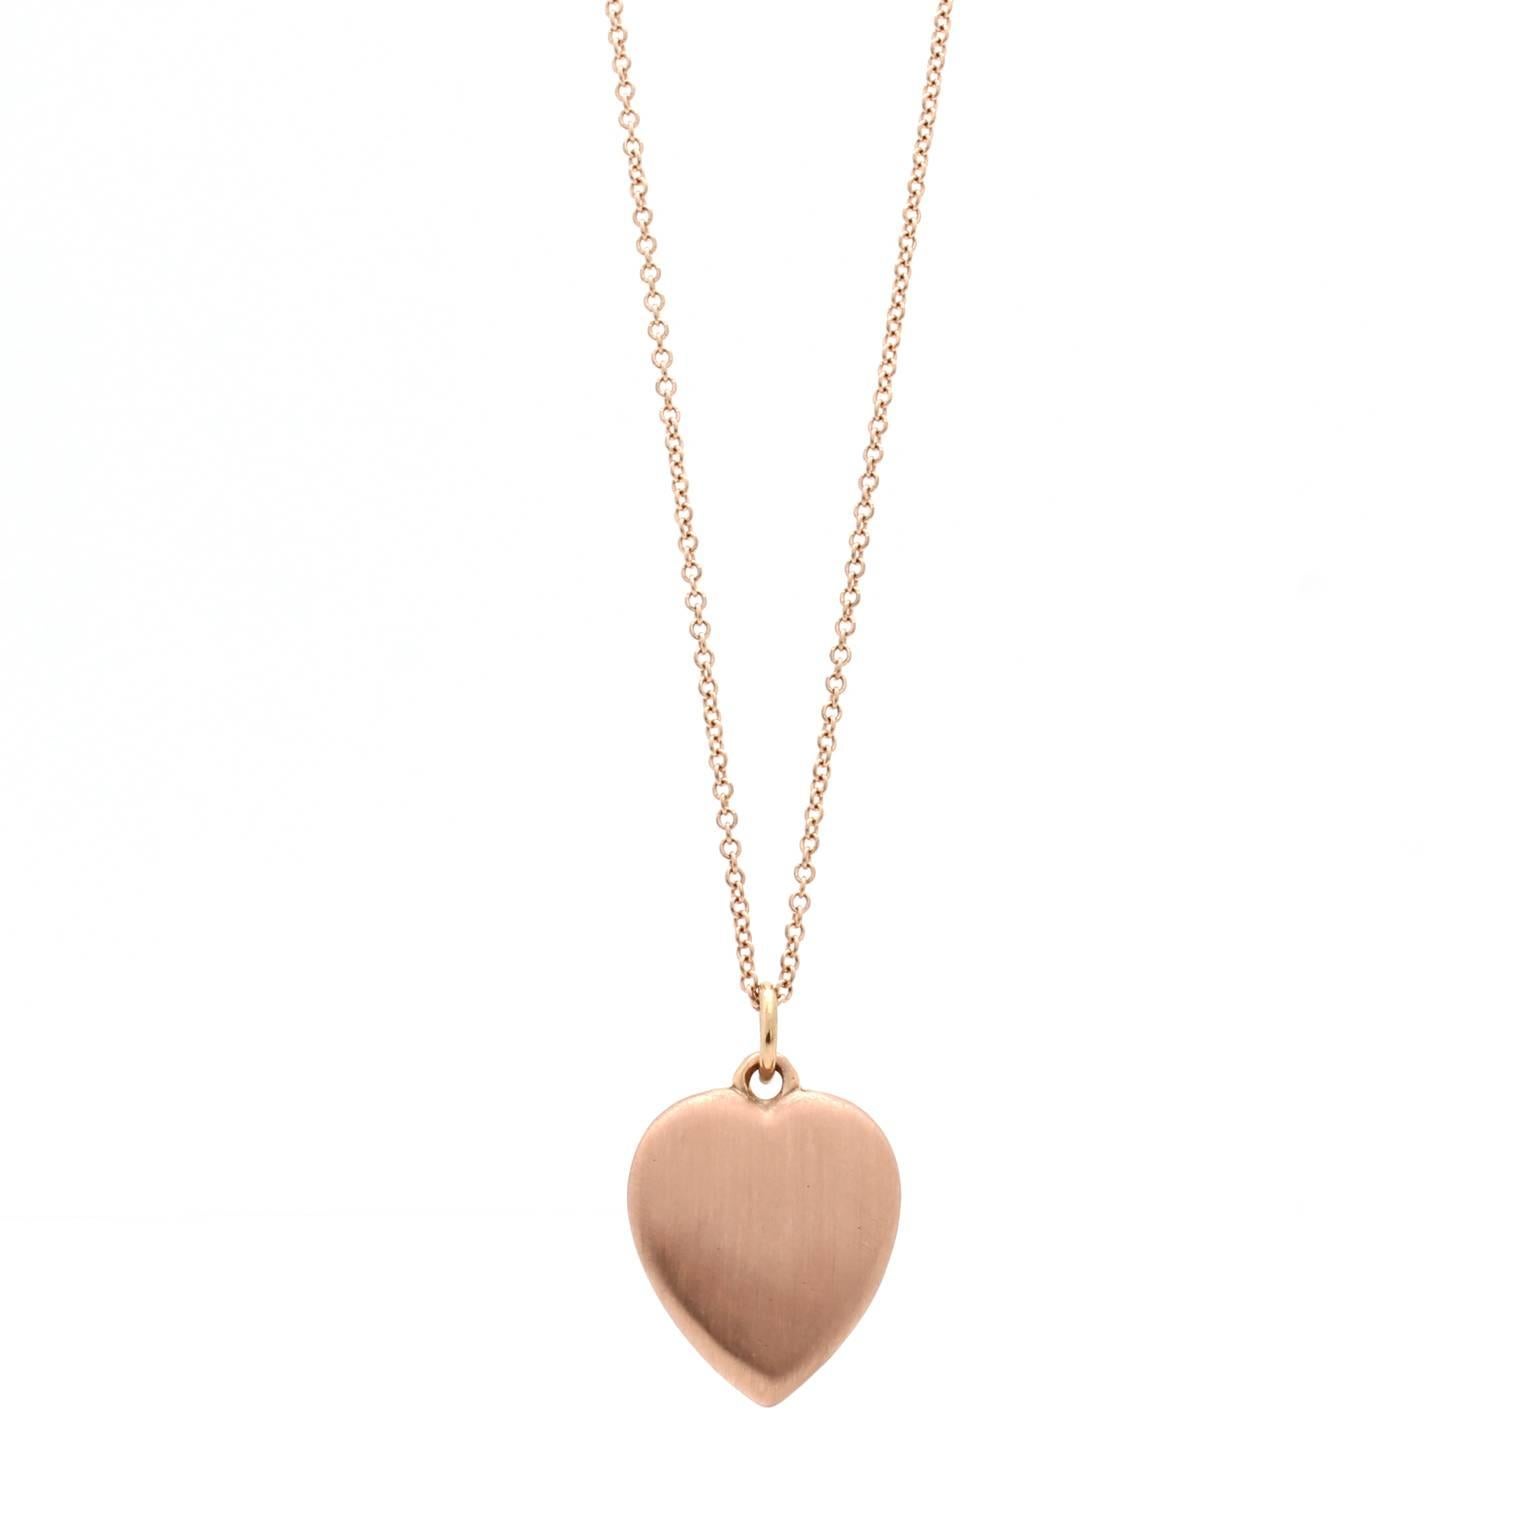 This 18k rose gold heart pendant features a raised wishbone motif. The heart is rounded on the front and back and the metal has a satin finish. The pendant is solid (not hollow) and is made of reclaimed gold. The heart measures 13mm by 15mm and